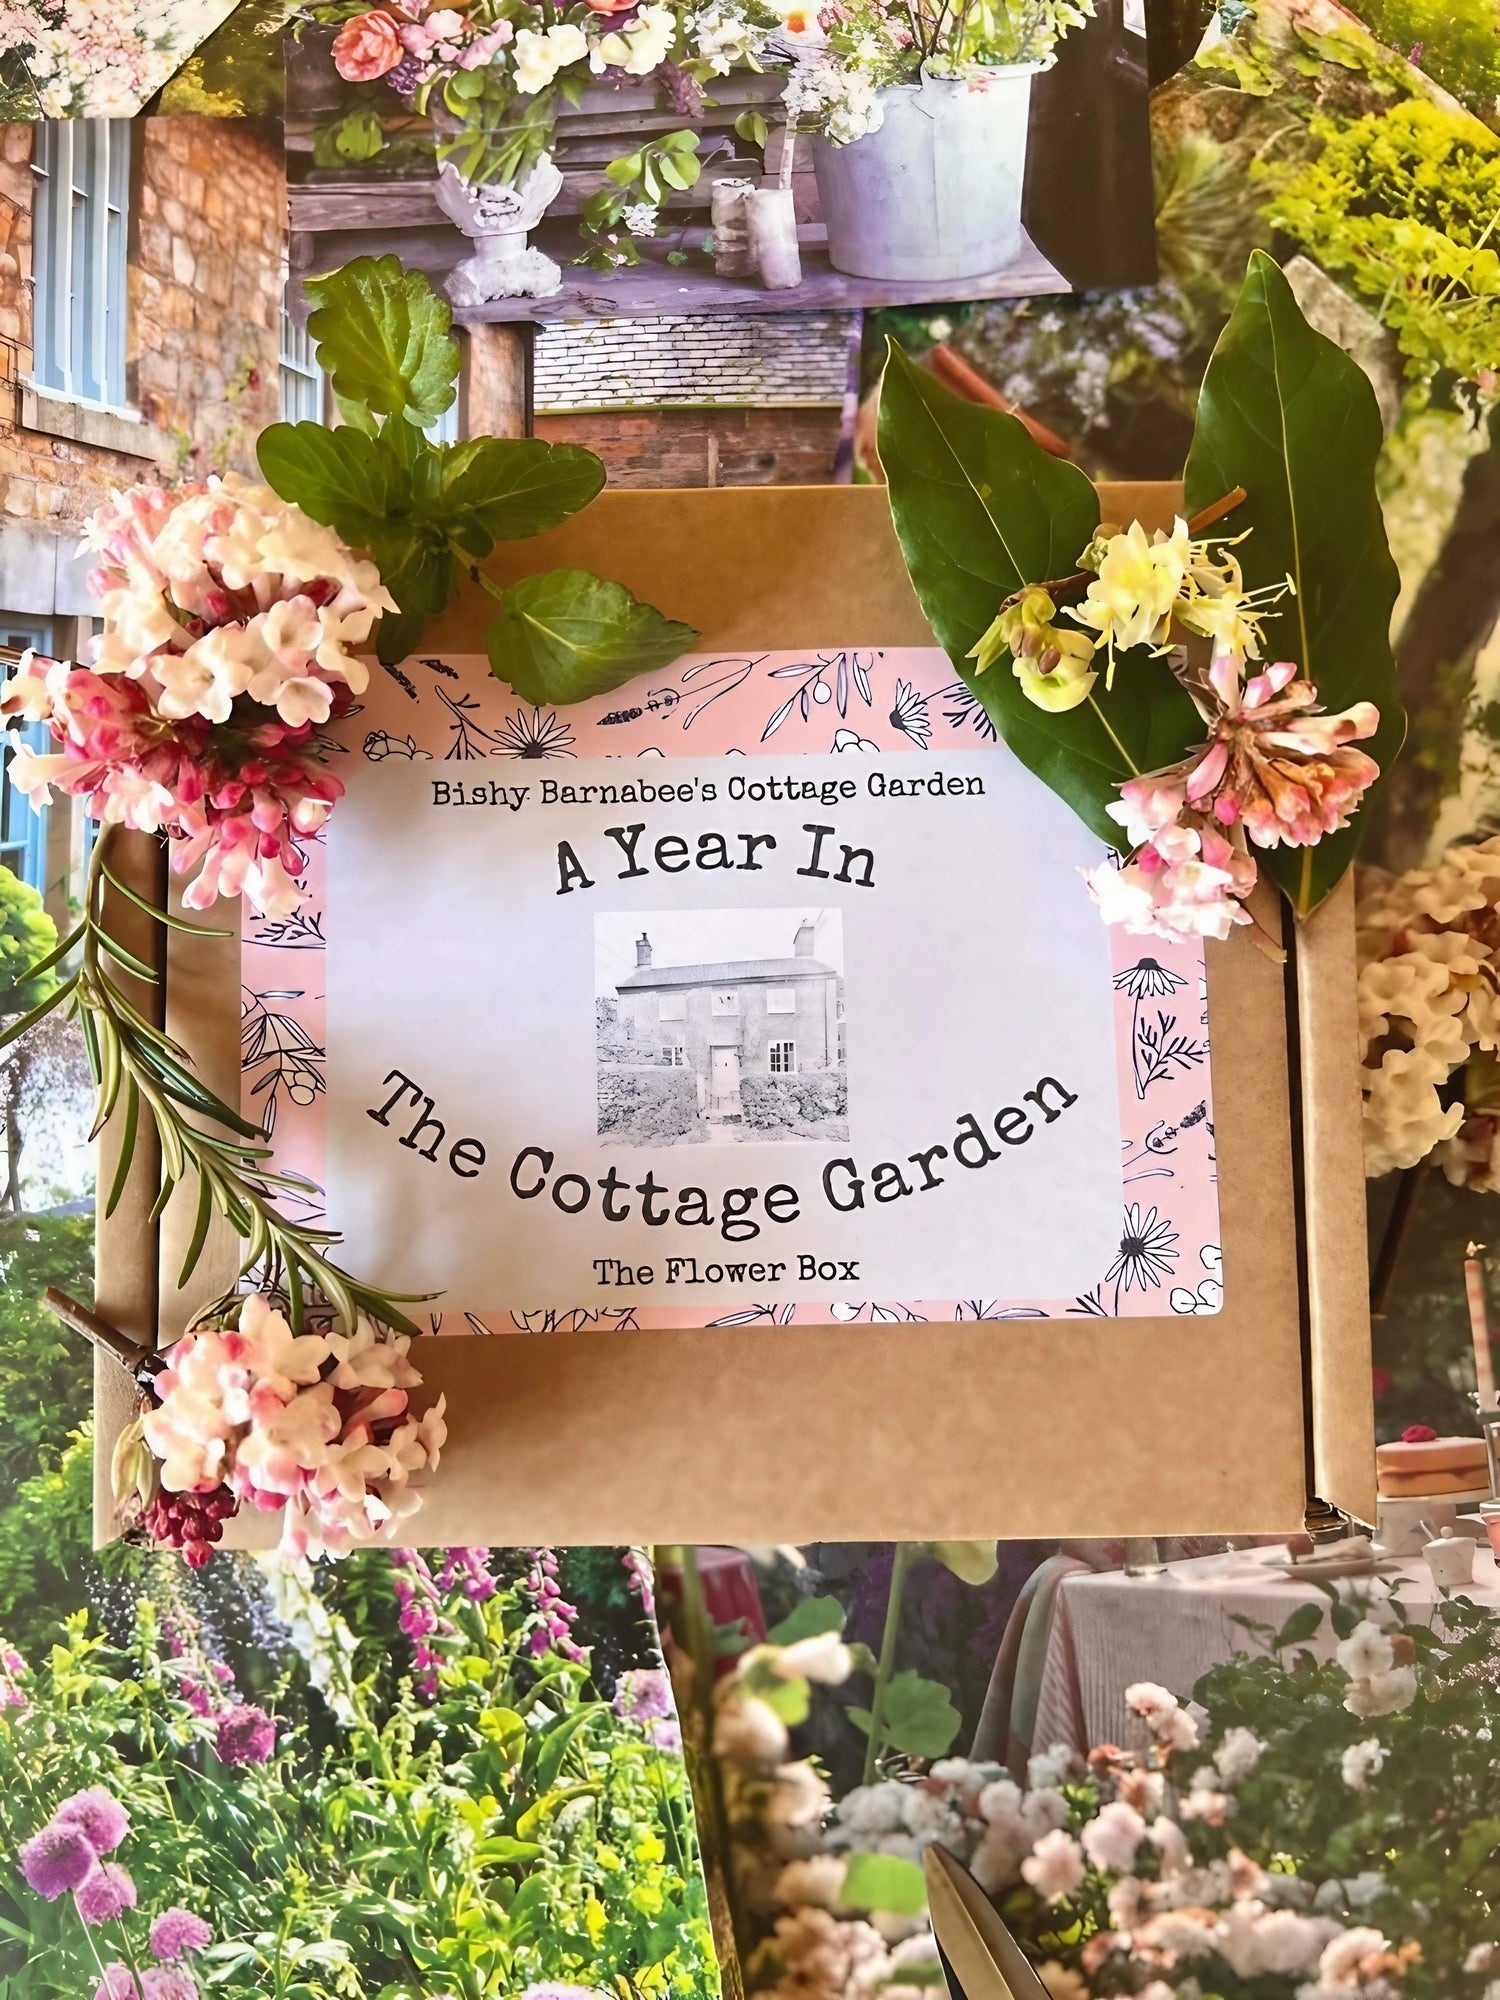 A Year in a Cottage Garden - Flower Box (12 Packs)